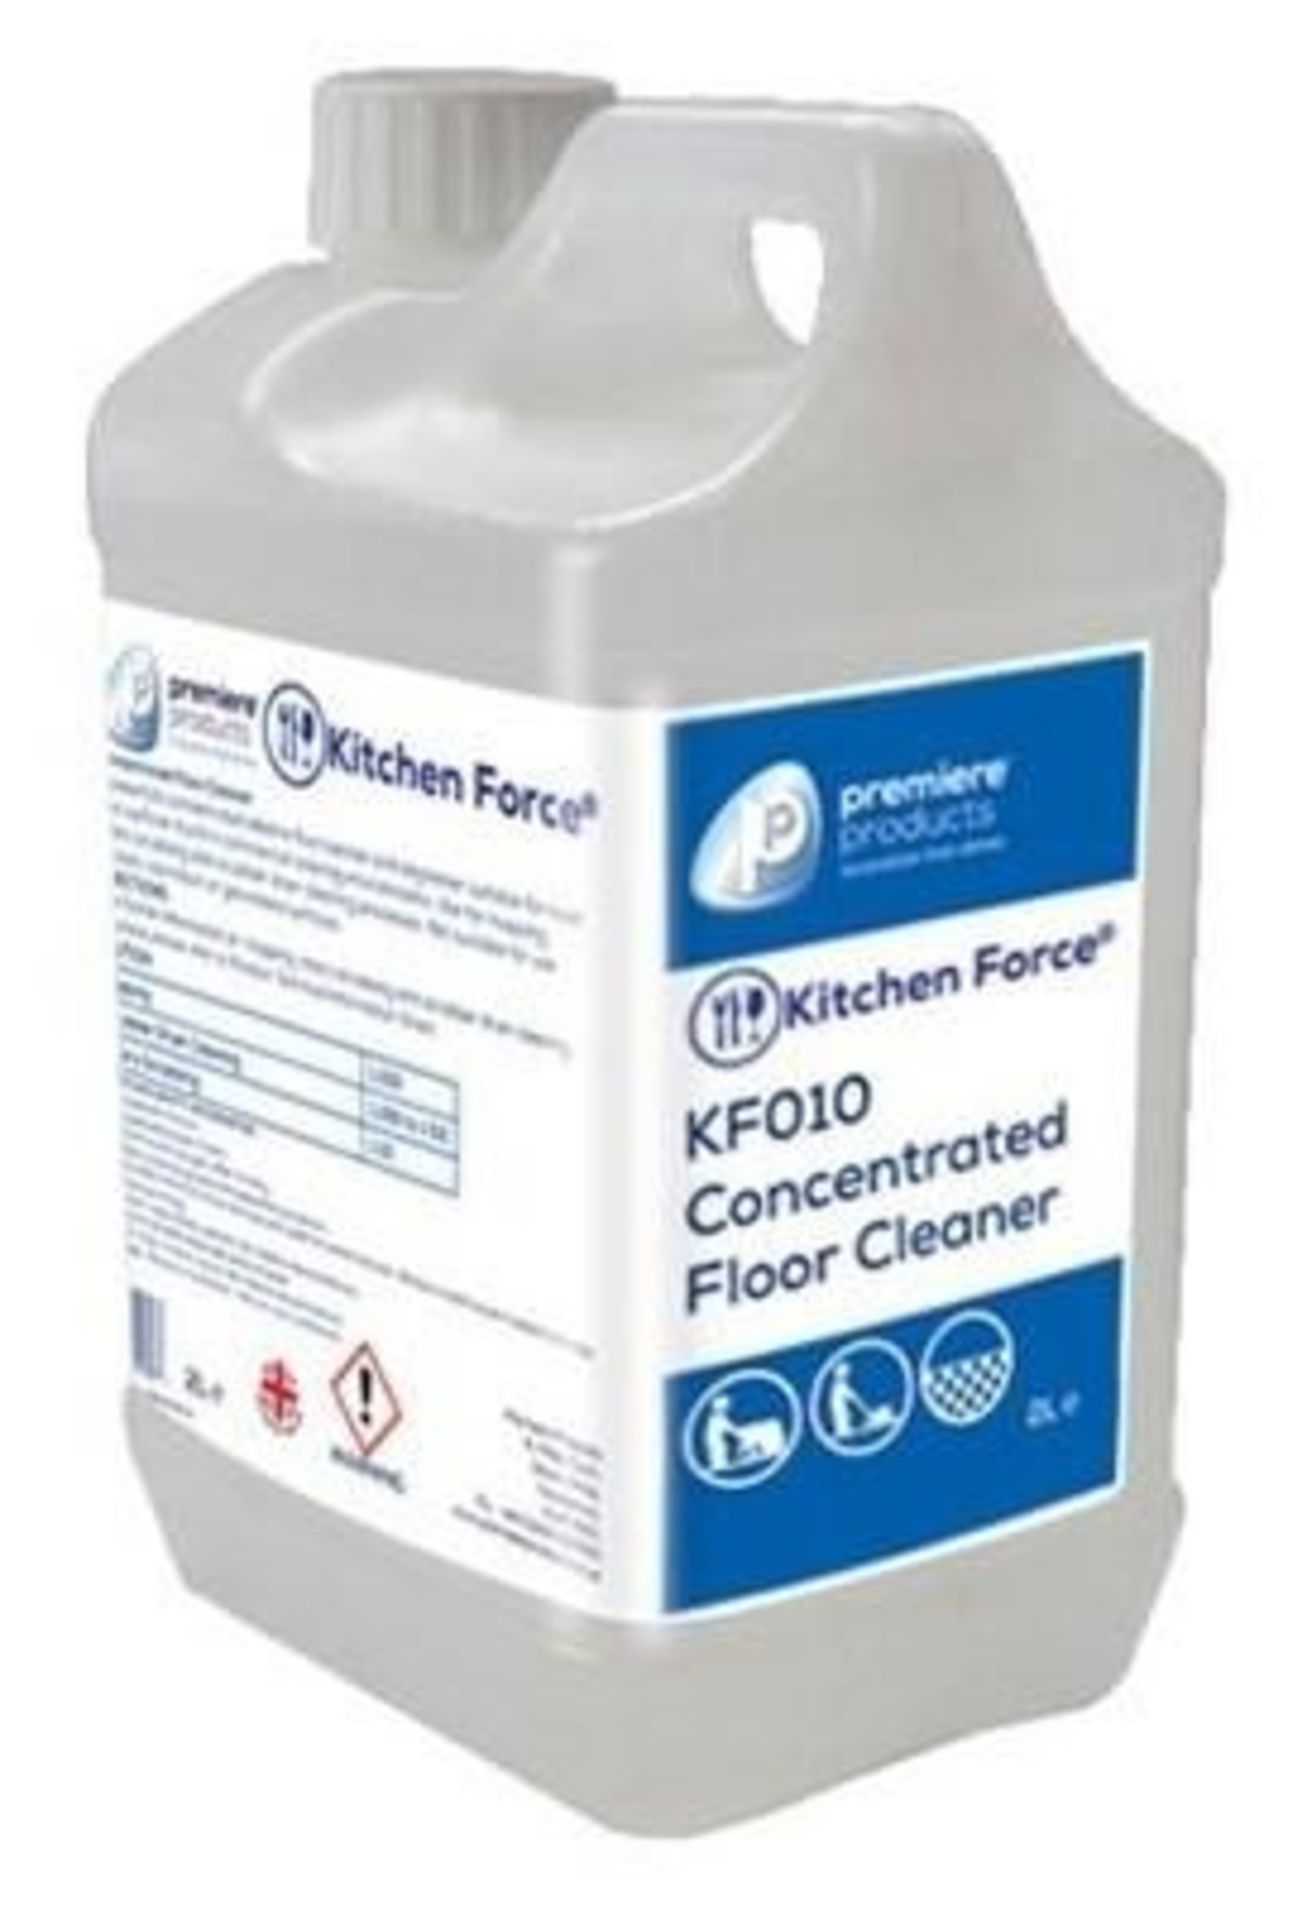 4 x Kitchen Force 2 Litre Concentrated Floor Cleaner - Premiere Products - Floor Cleaner & Degreaser